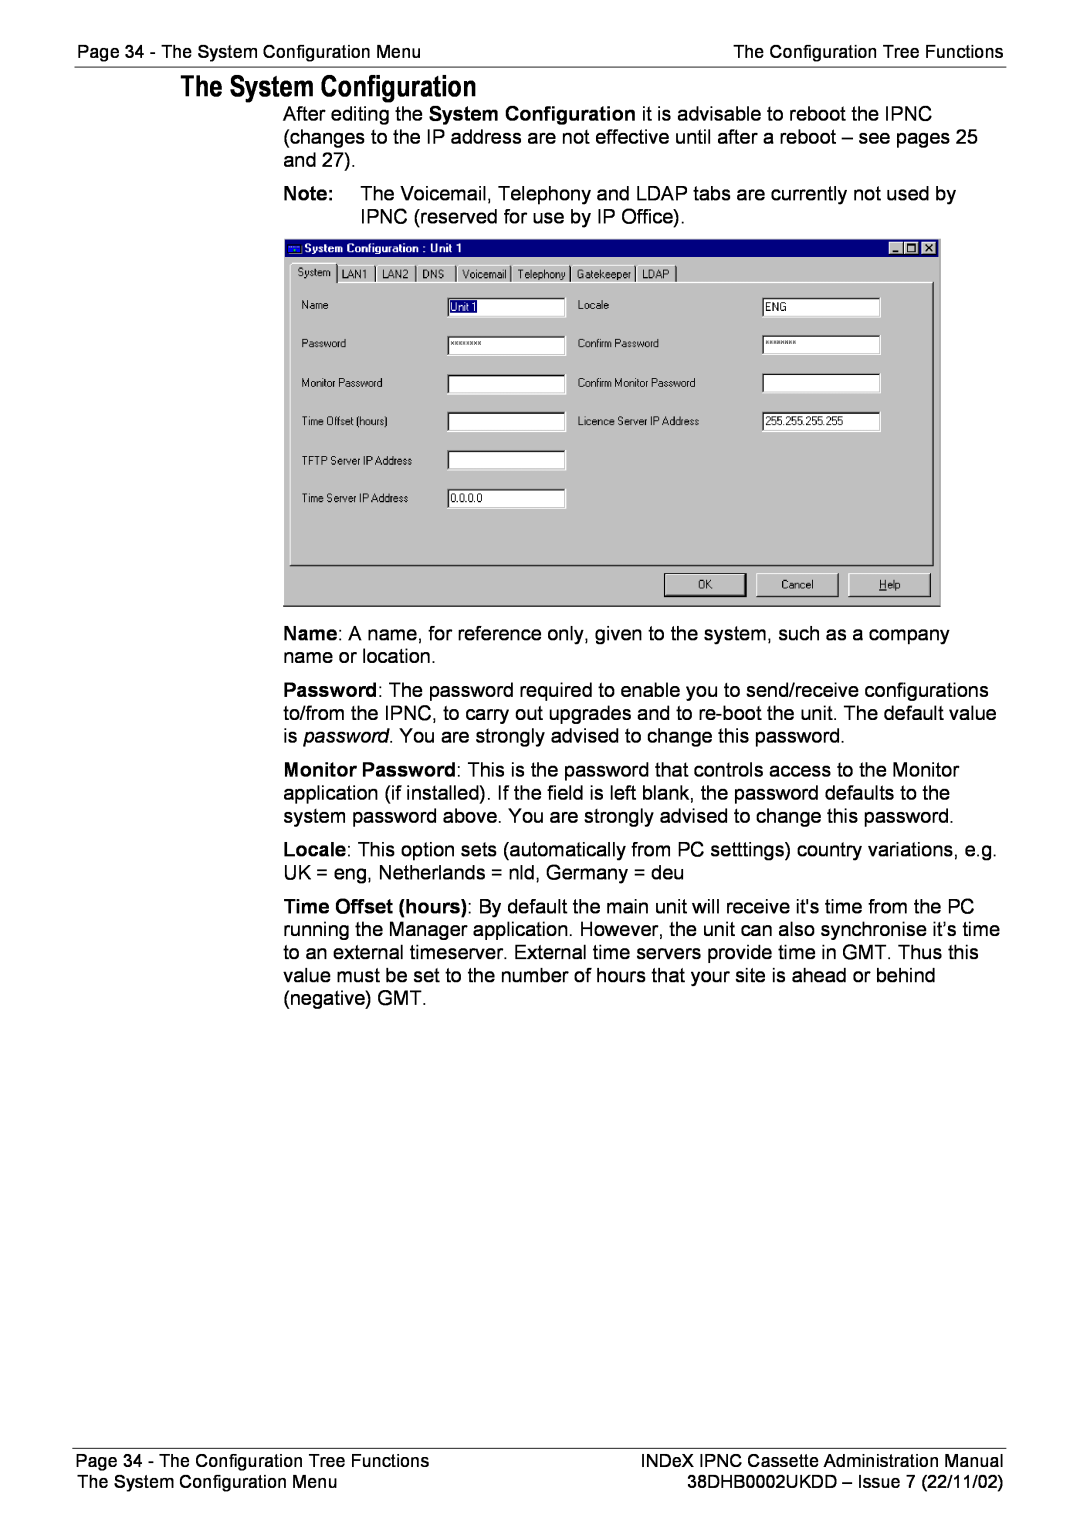 Avaya 38DHB0002UKDD manual Page 34 - The System Configuration Menu, The Configuration Tree Functions 